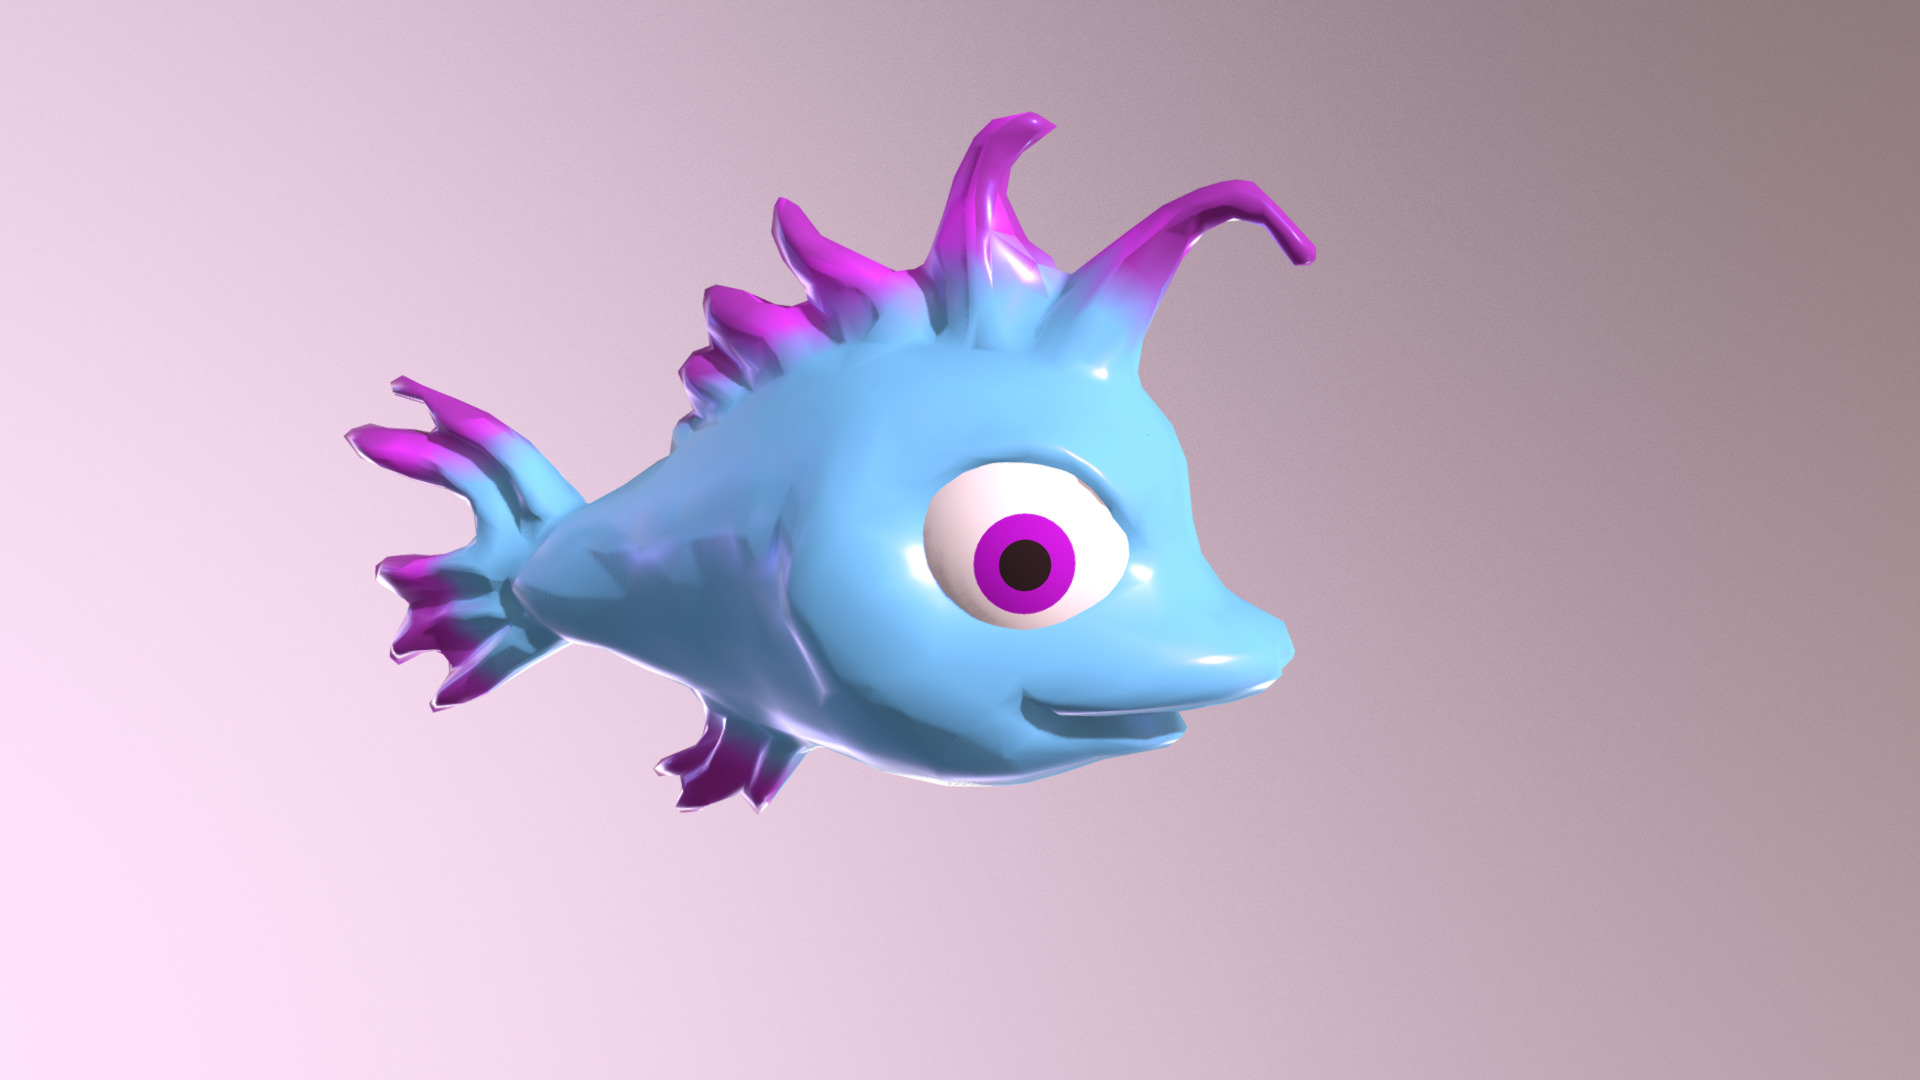 3D model Cute Fishy - This is a 3D model of the Cute Fishy. The 3D model is about a blue fish with a pink background.